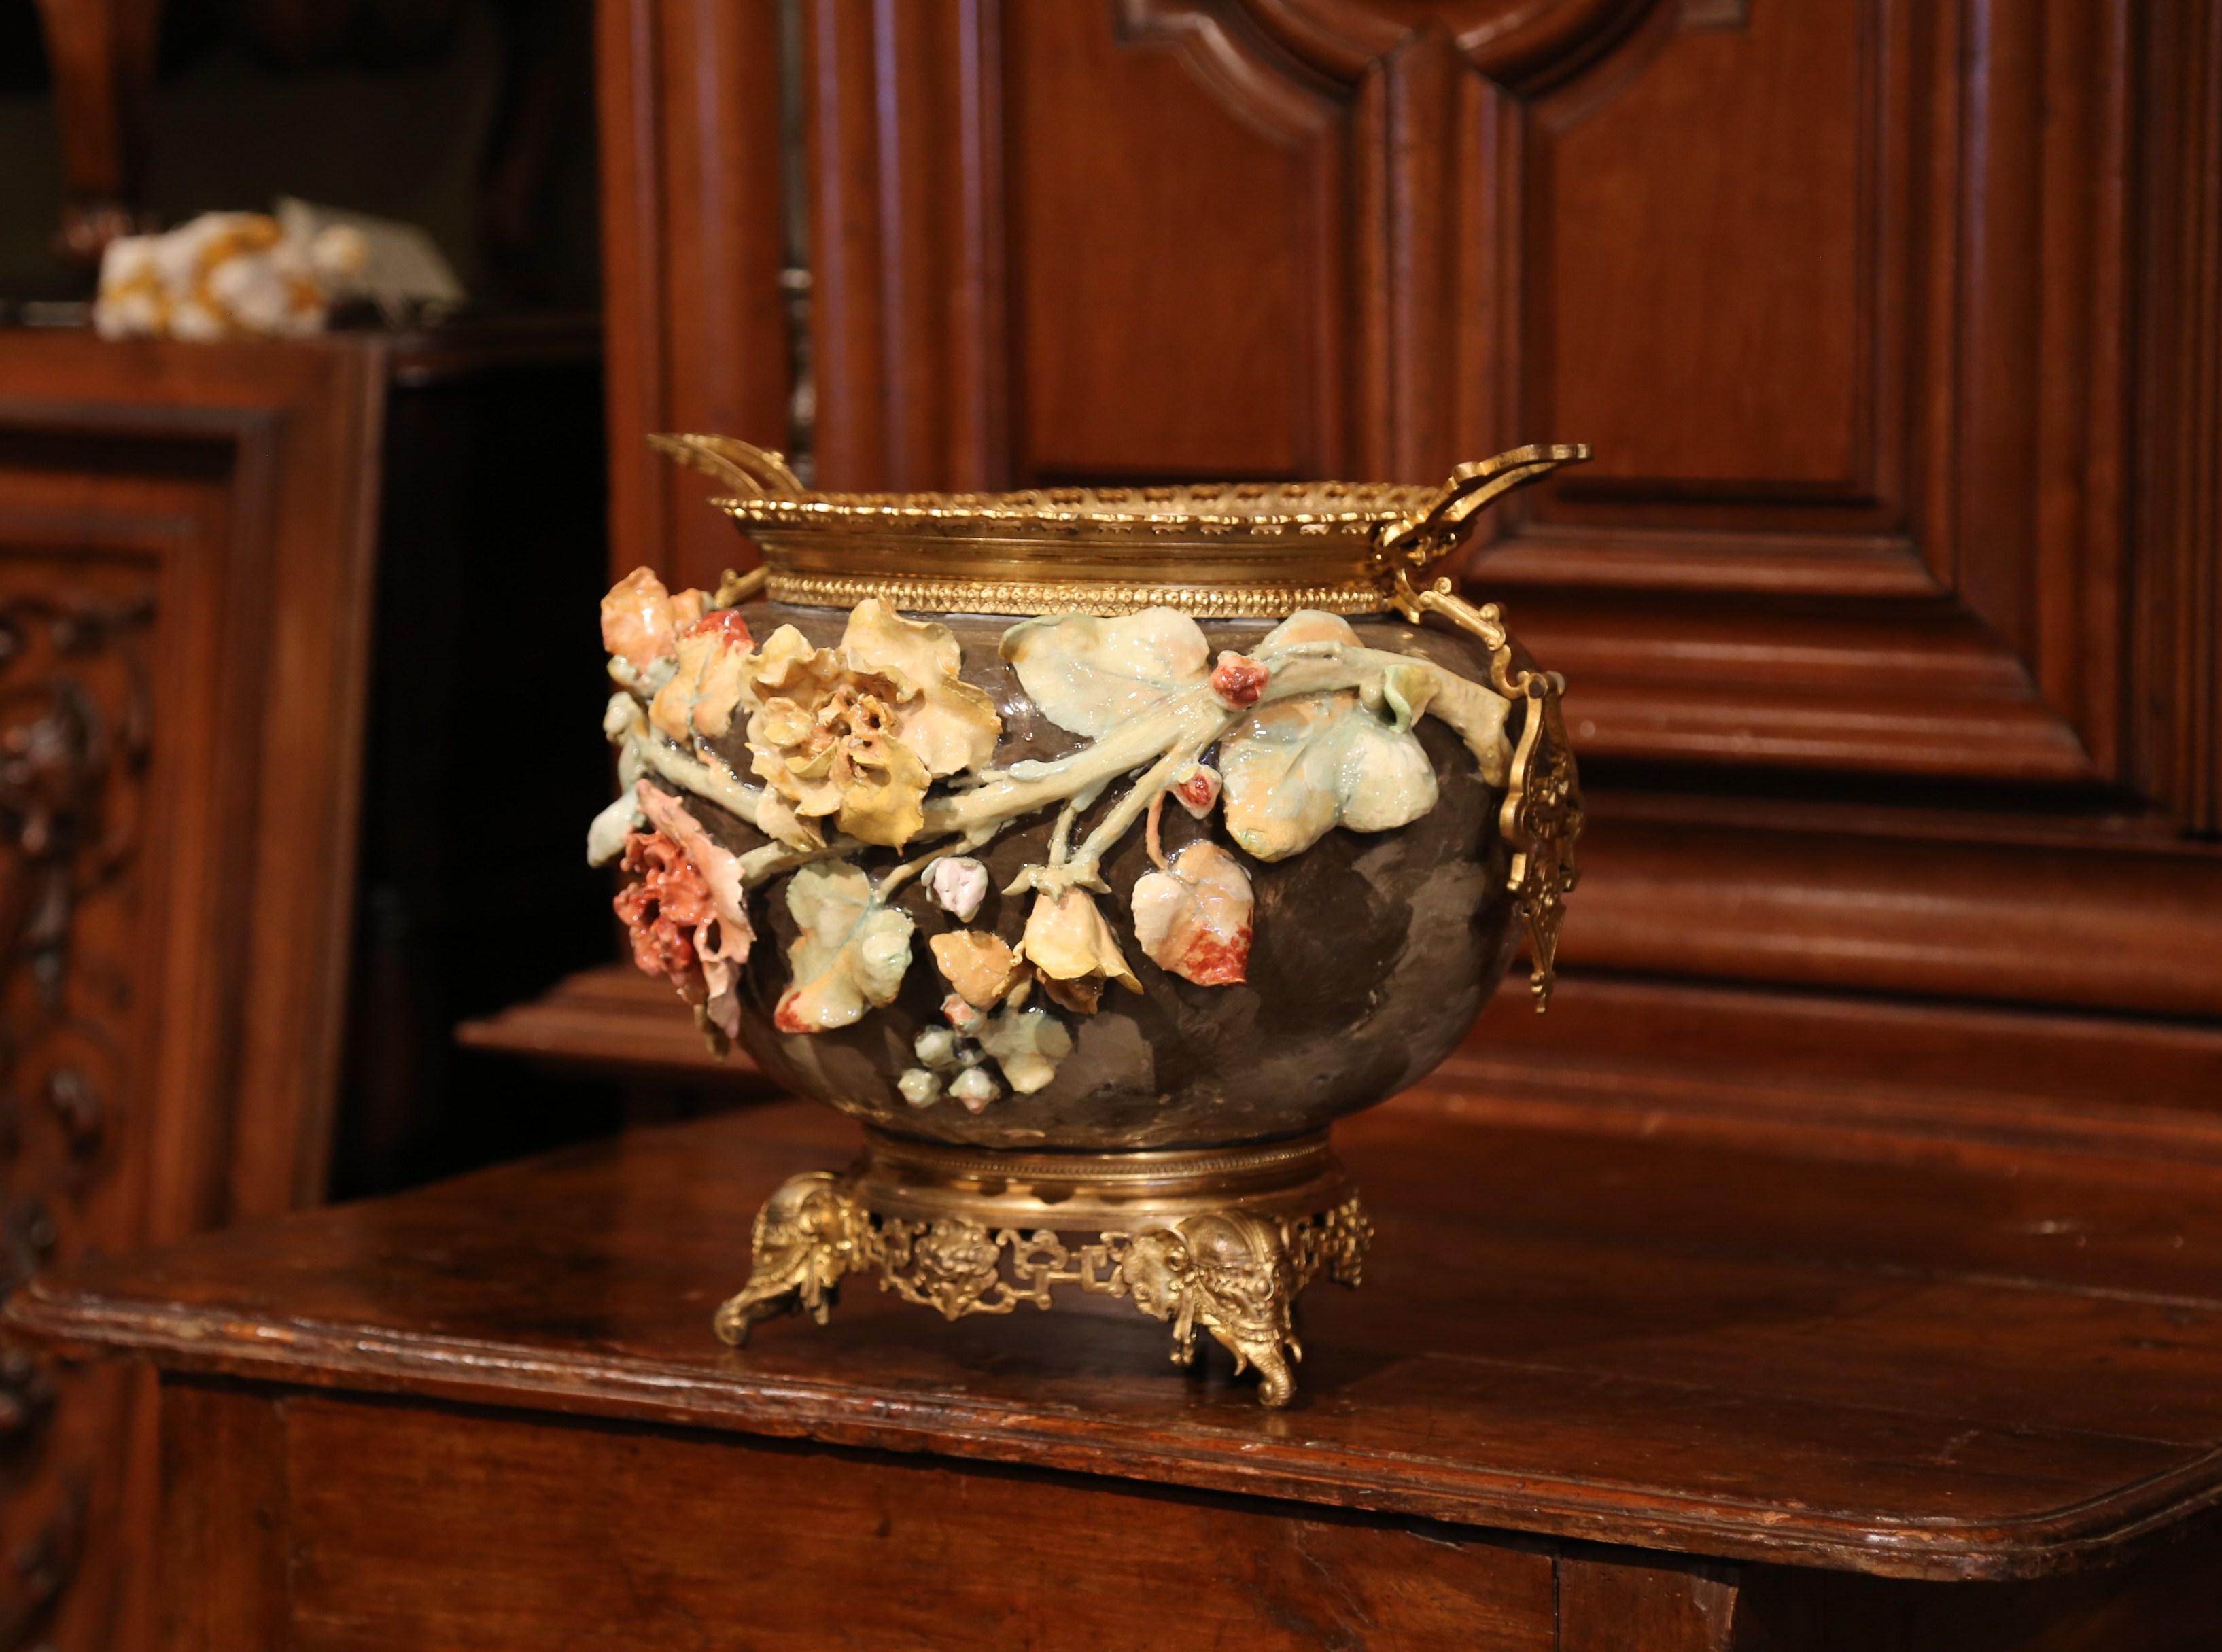 Embellish your home with this elegant antique, hand-painted Majolica planter from Montigny sur Loing, France. Sculpted circa 1860, the ornate jardinière sits on a bronze base embellished by four decorative oriental elephant trunk feet. You'll also